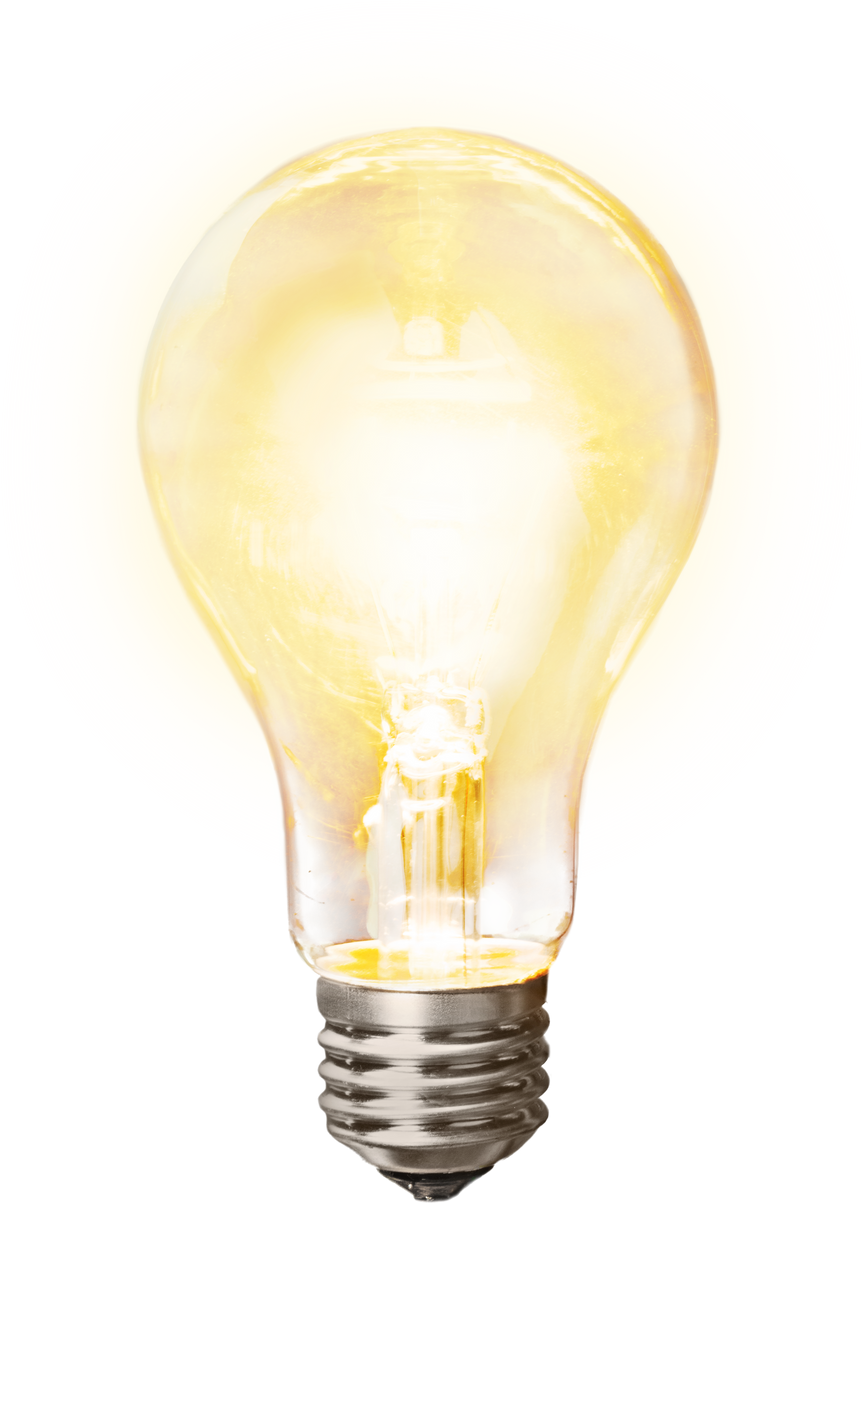 Standard Incandescent Bulb - Isolated